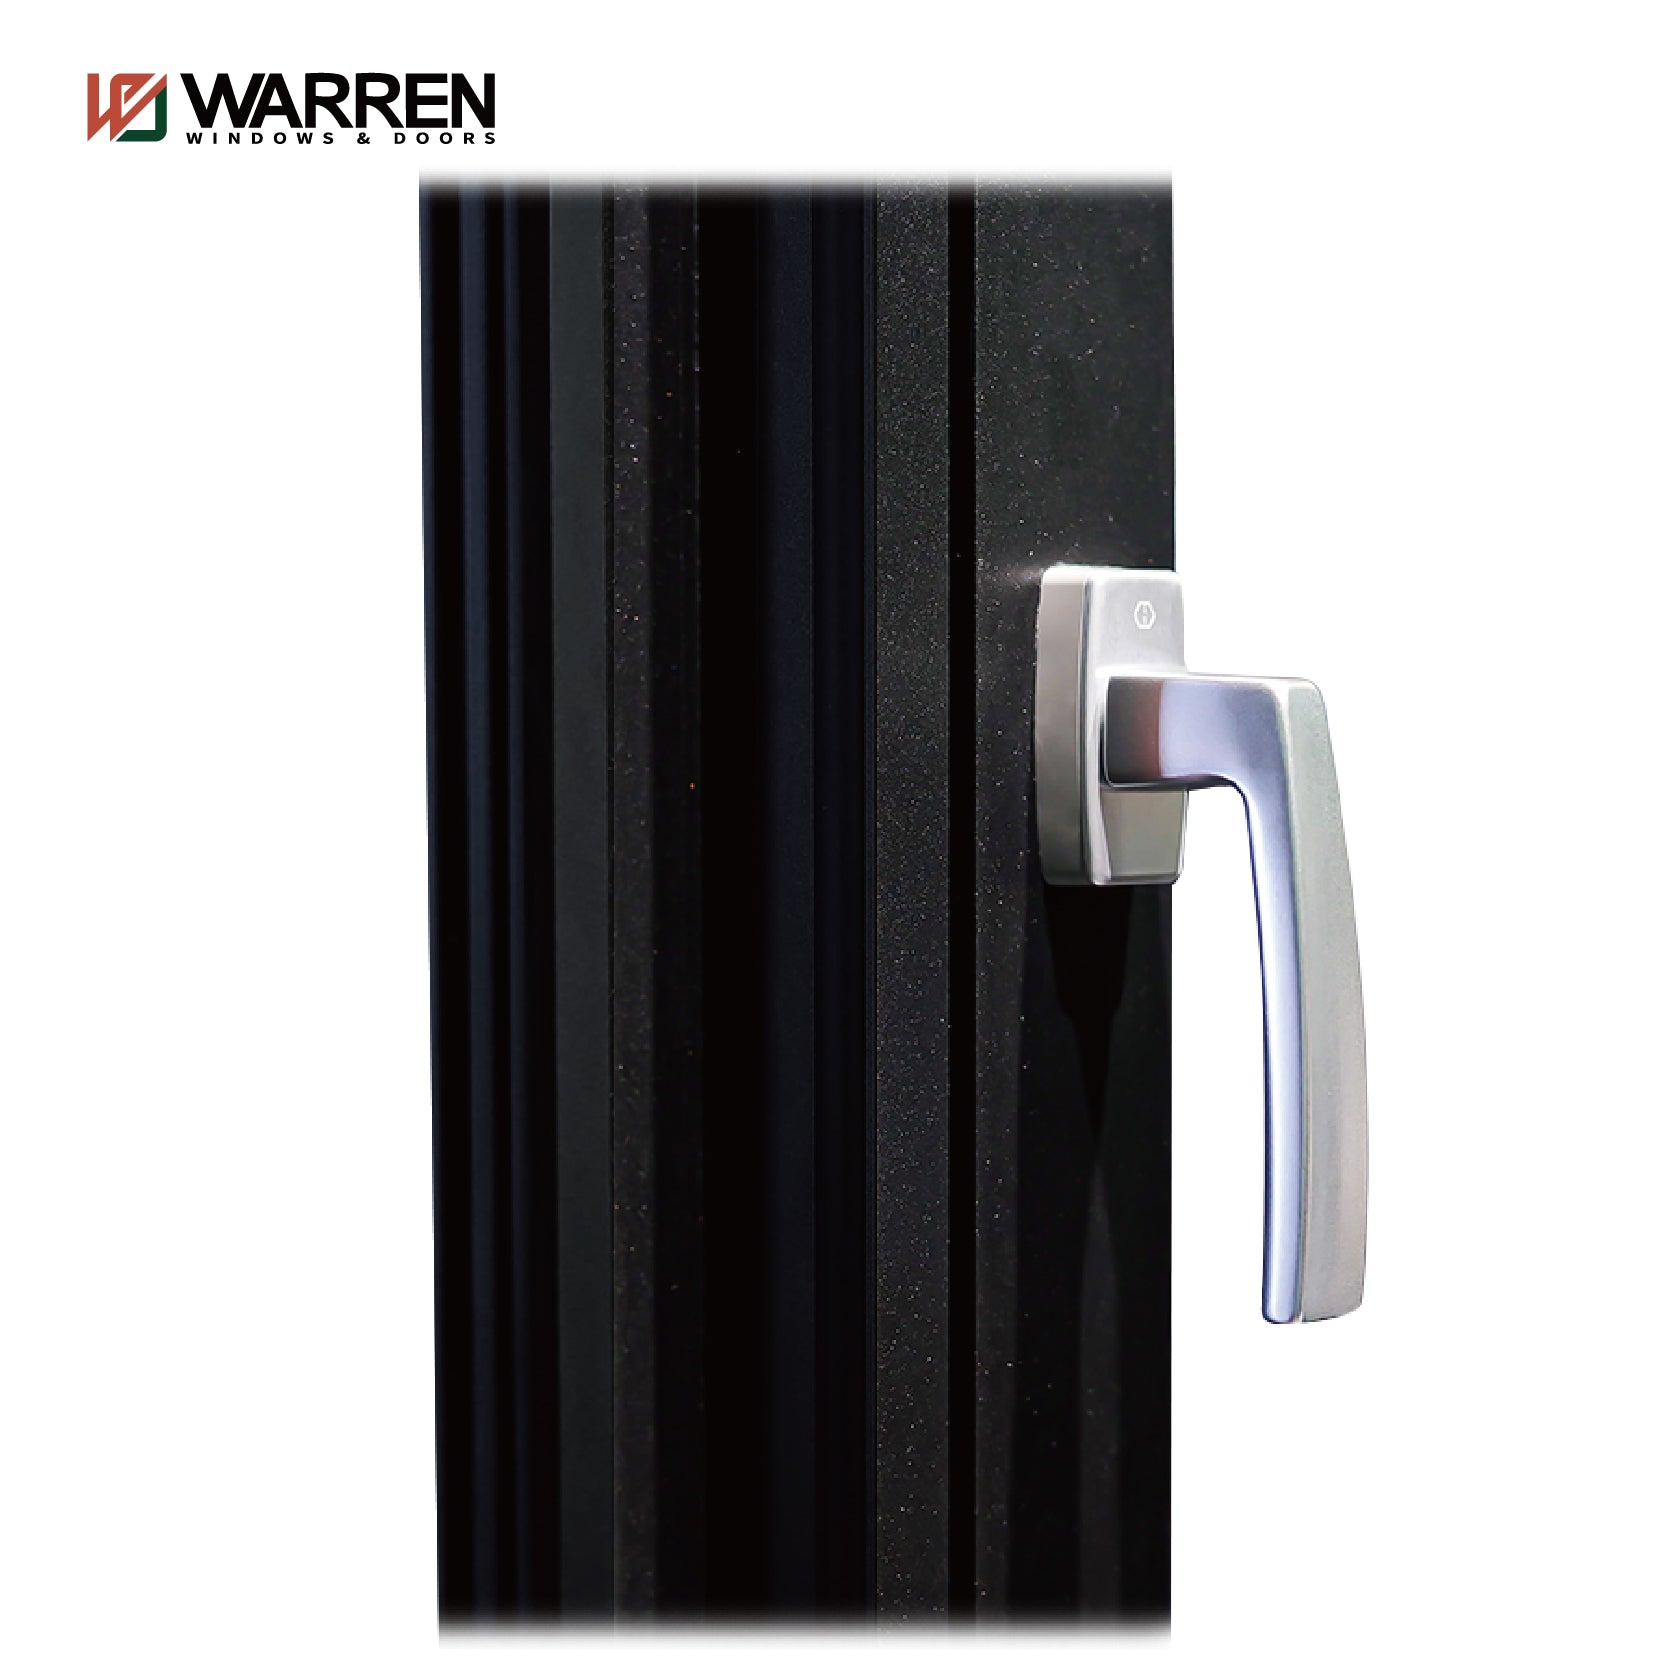 Warren 2 foot window 2ft cheap factory price customized design free combination with fixed and tilt turn windows